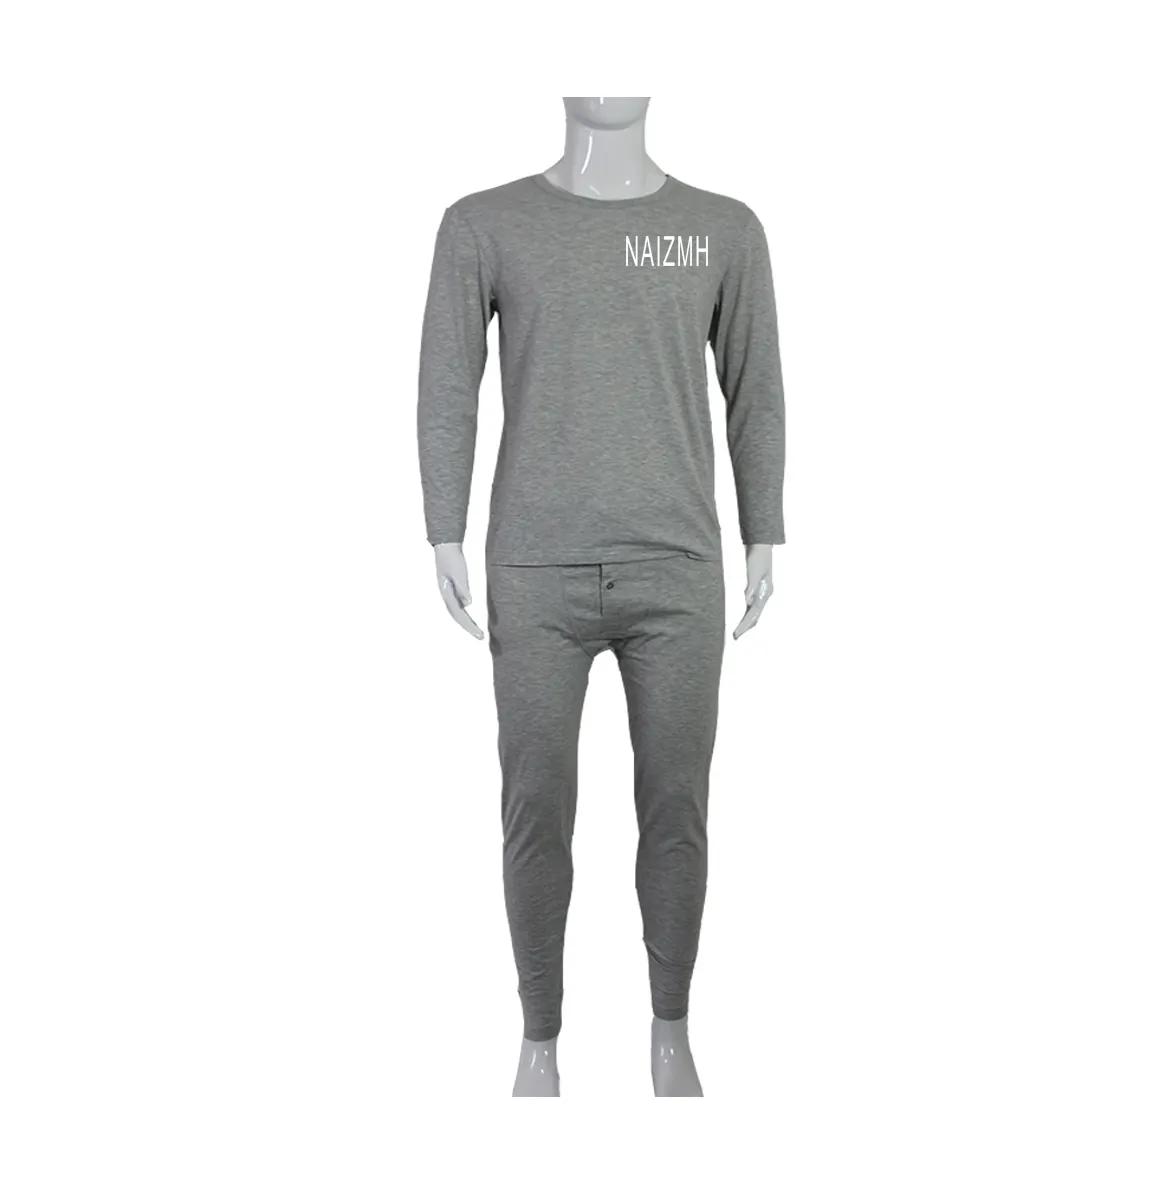 New Men's Cool Compression Long sleeve long jhon